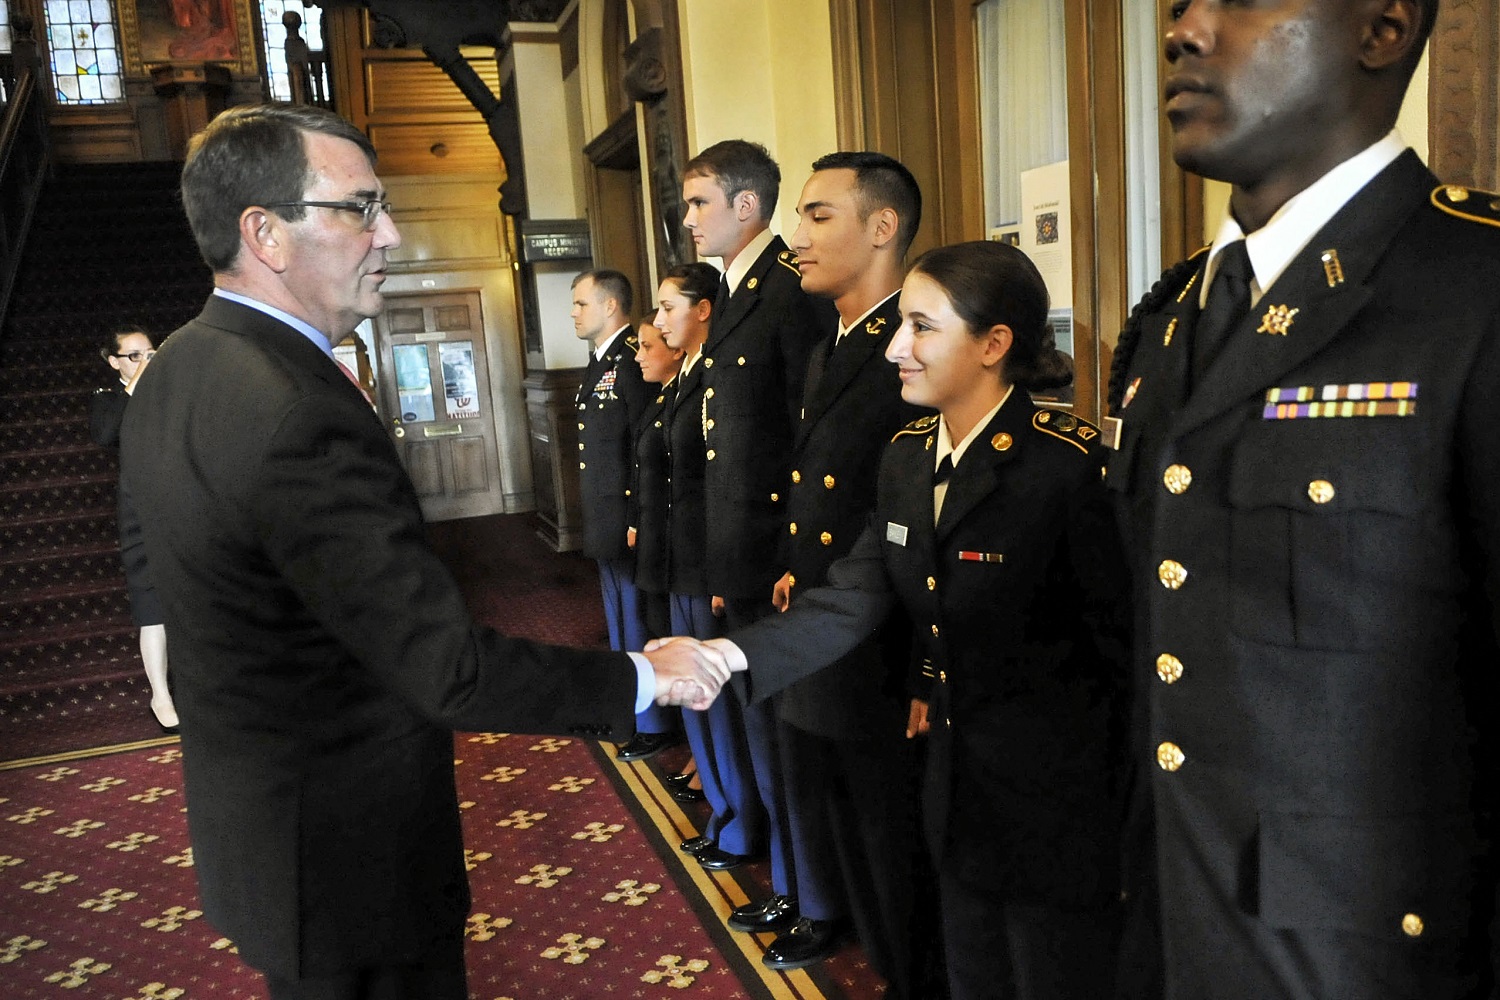 Defense Secretary Ash Carter shakes hands and gives his personal coin to ROTC members after delivering remarks on the Defense Department's efforts regarding sexual assault prevention and response at Georgetown University in Washington, D.C., April 22, 2015. DoD photo by Glenn Fawcett  
